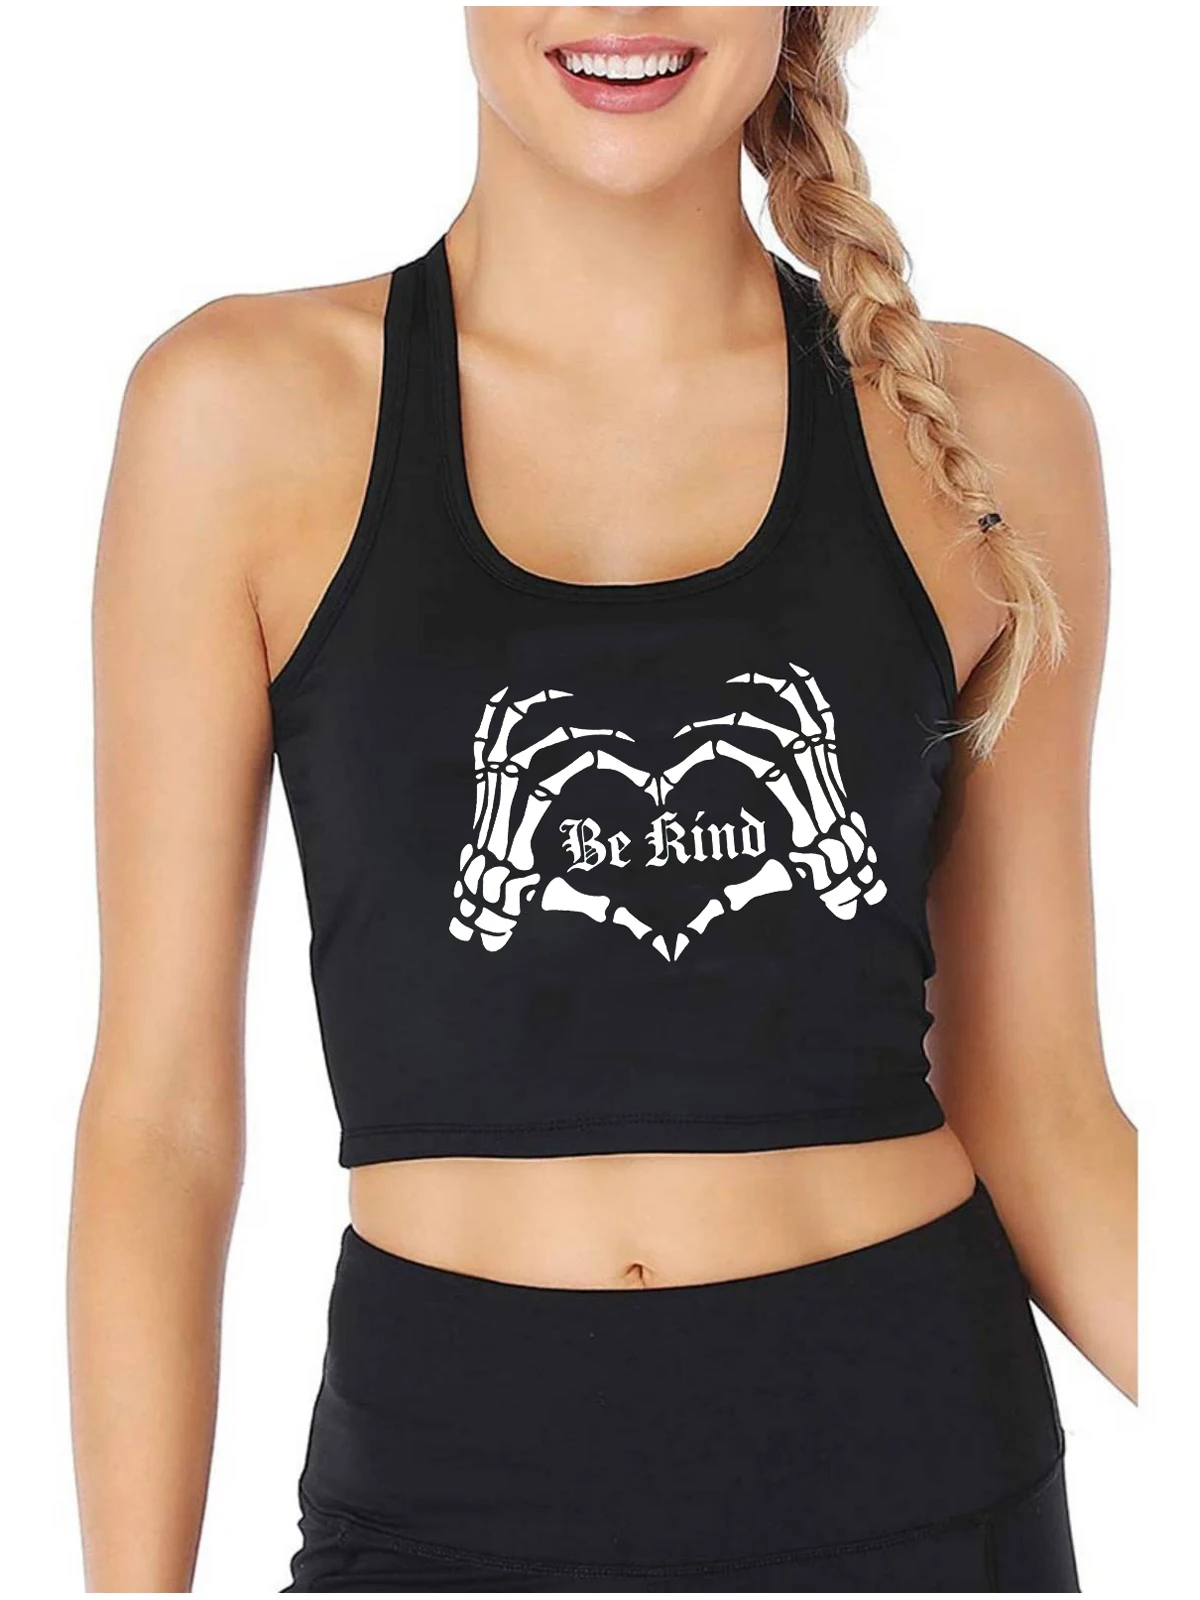 

Be Rind Skeleton Hand Graphic Sexy Slim Crop Top Girl's Funny Creepy Outfit Bones Grunge Alternative Tank Tops Gothic Camisole